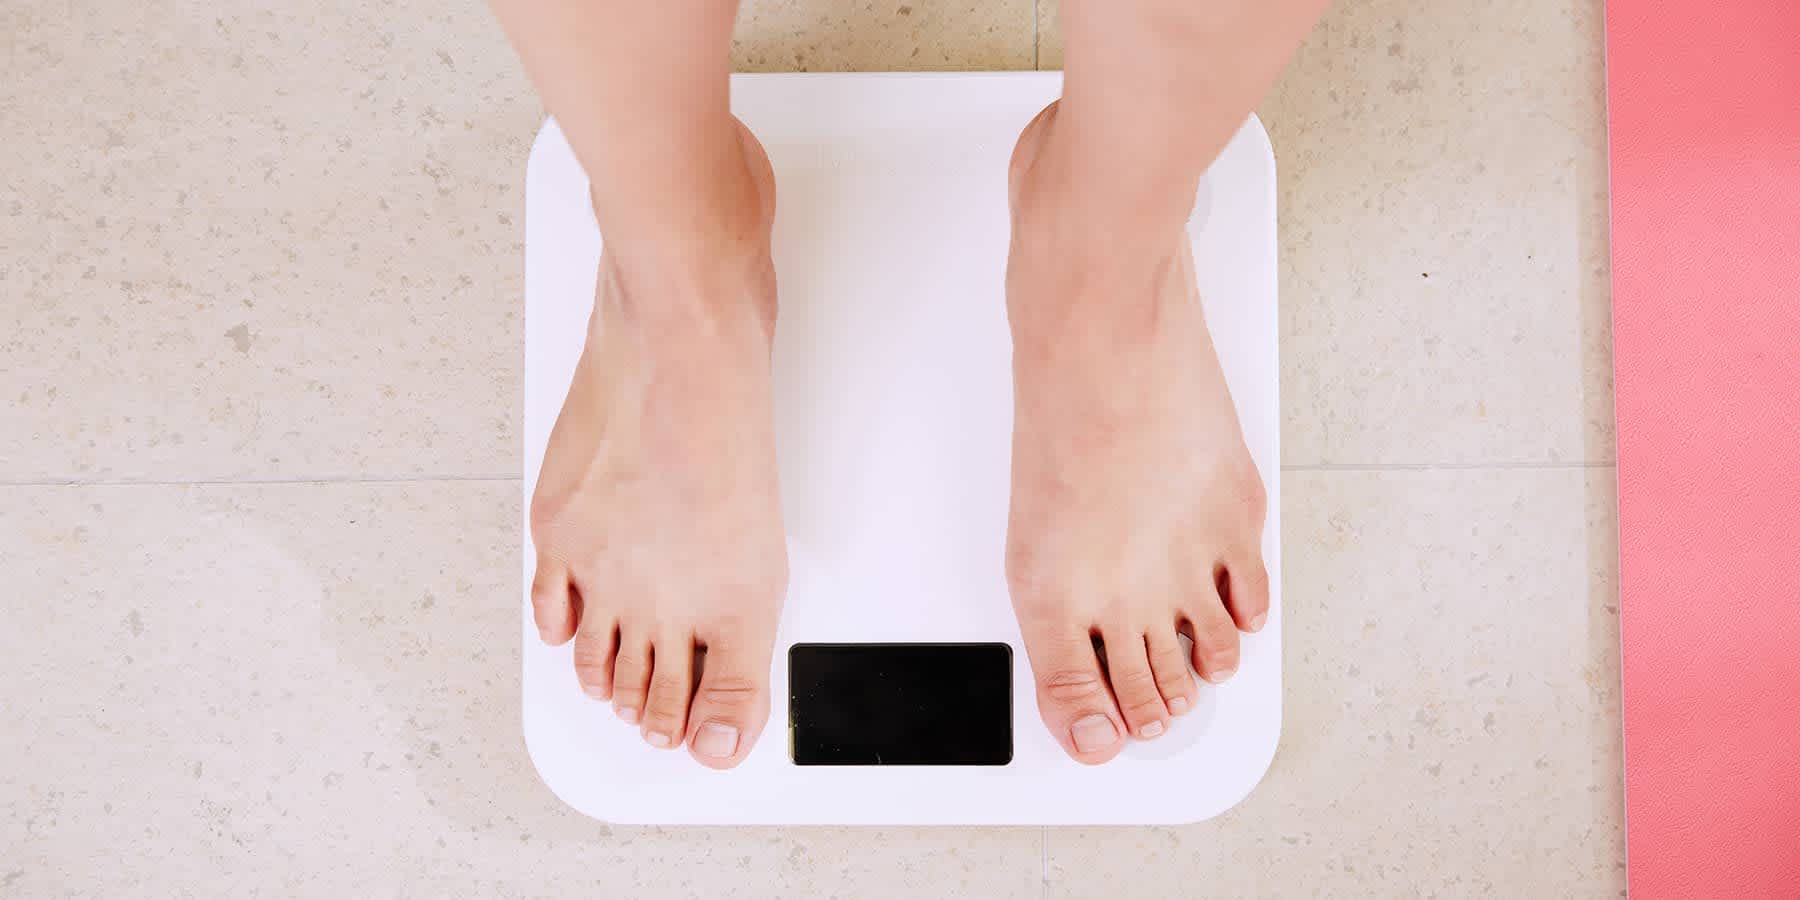 Person standing on bathroom scale while wondering about the connection between hormones and weight loss